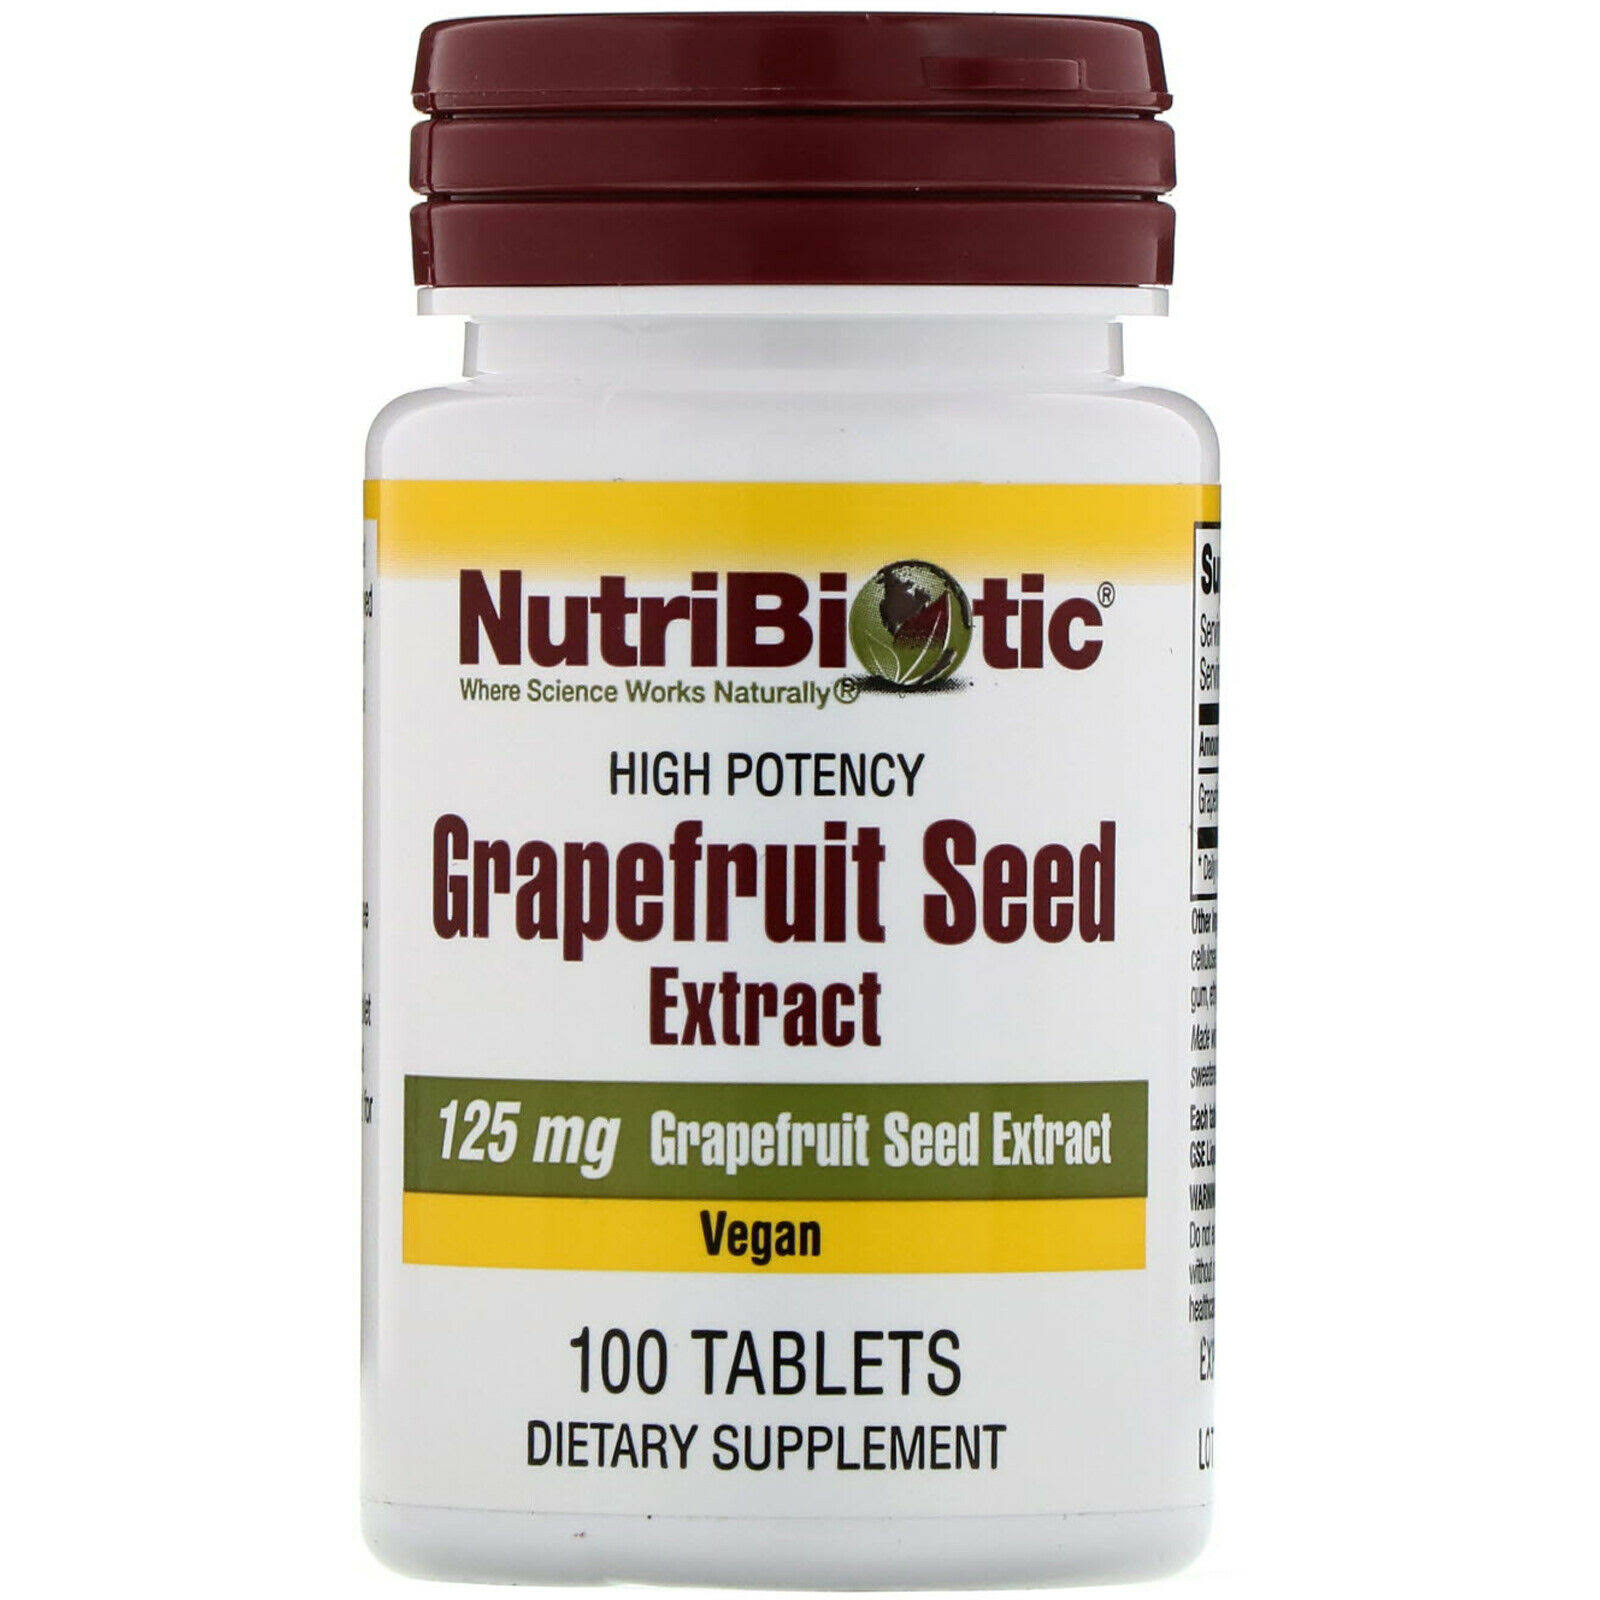 Nutribiotic 125mg Grapefruit Seed Extract - 100 Tablets